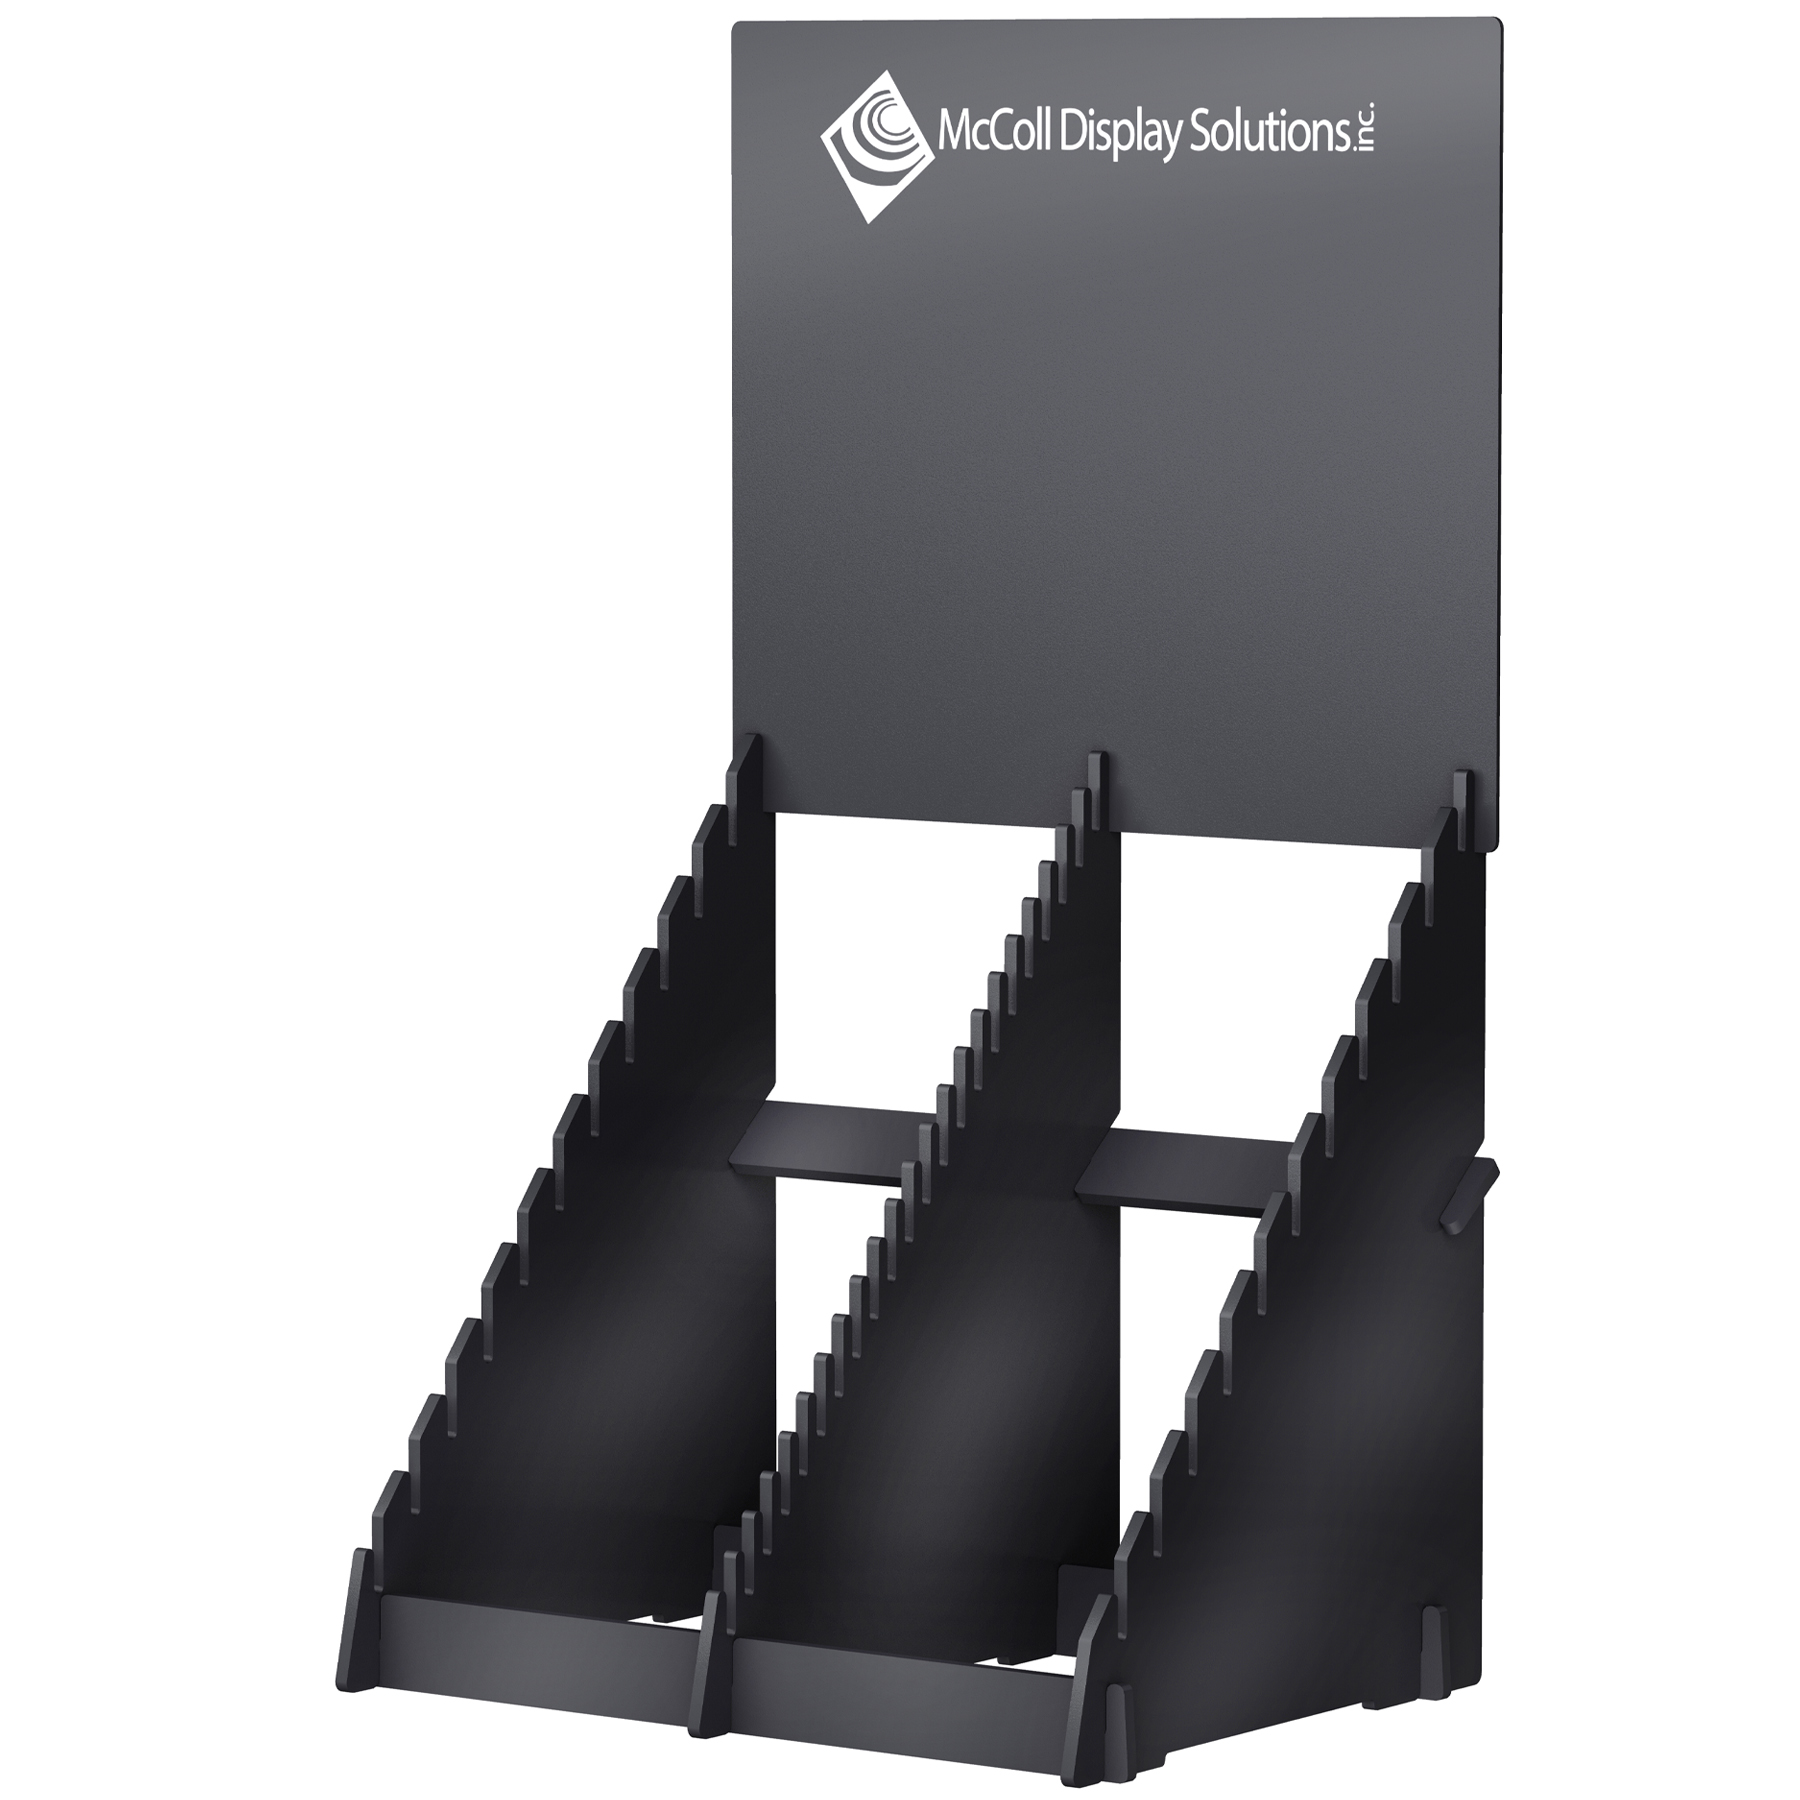 Alternate Slots Large Capacity Strong Routed Wood Slip-Fit Waterfall Display with Optional Screen Printed Logo or Full Color Signage